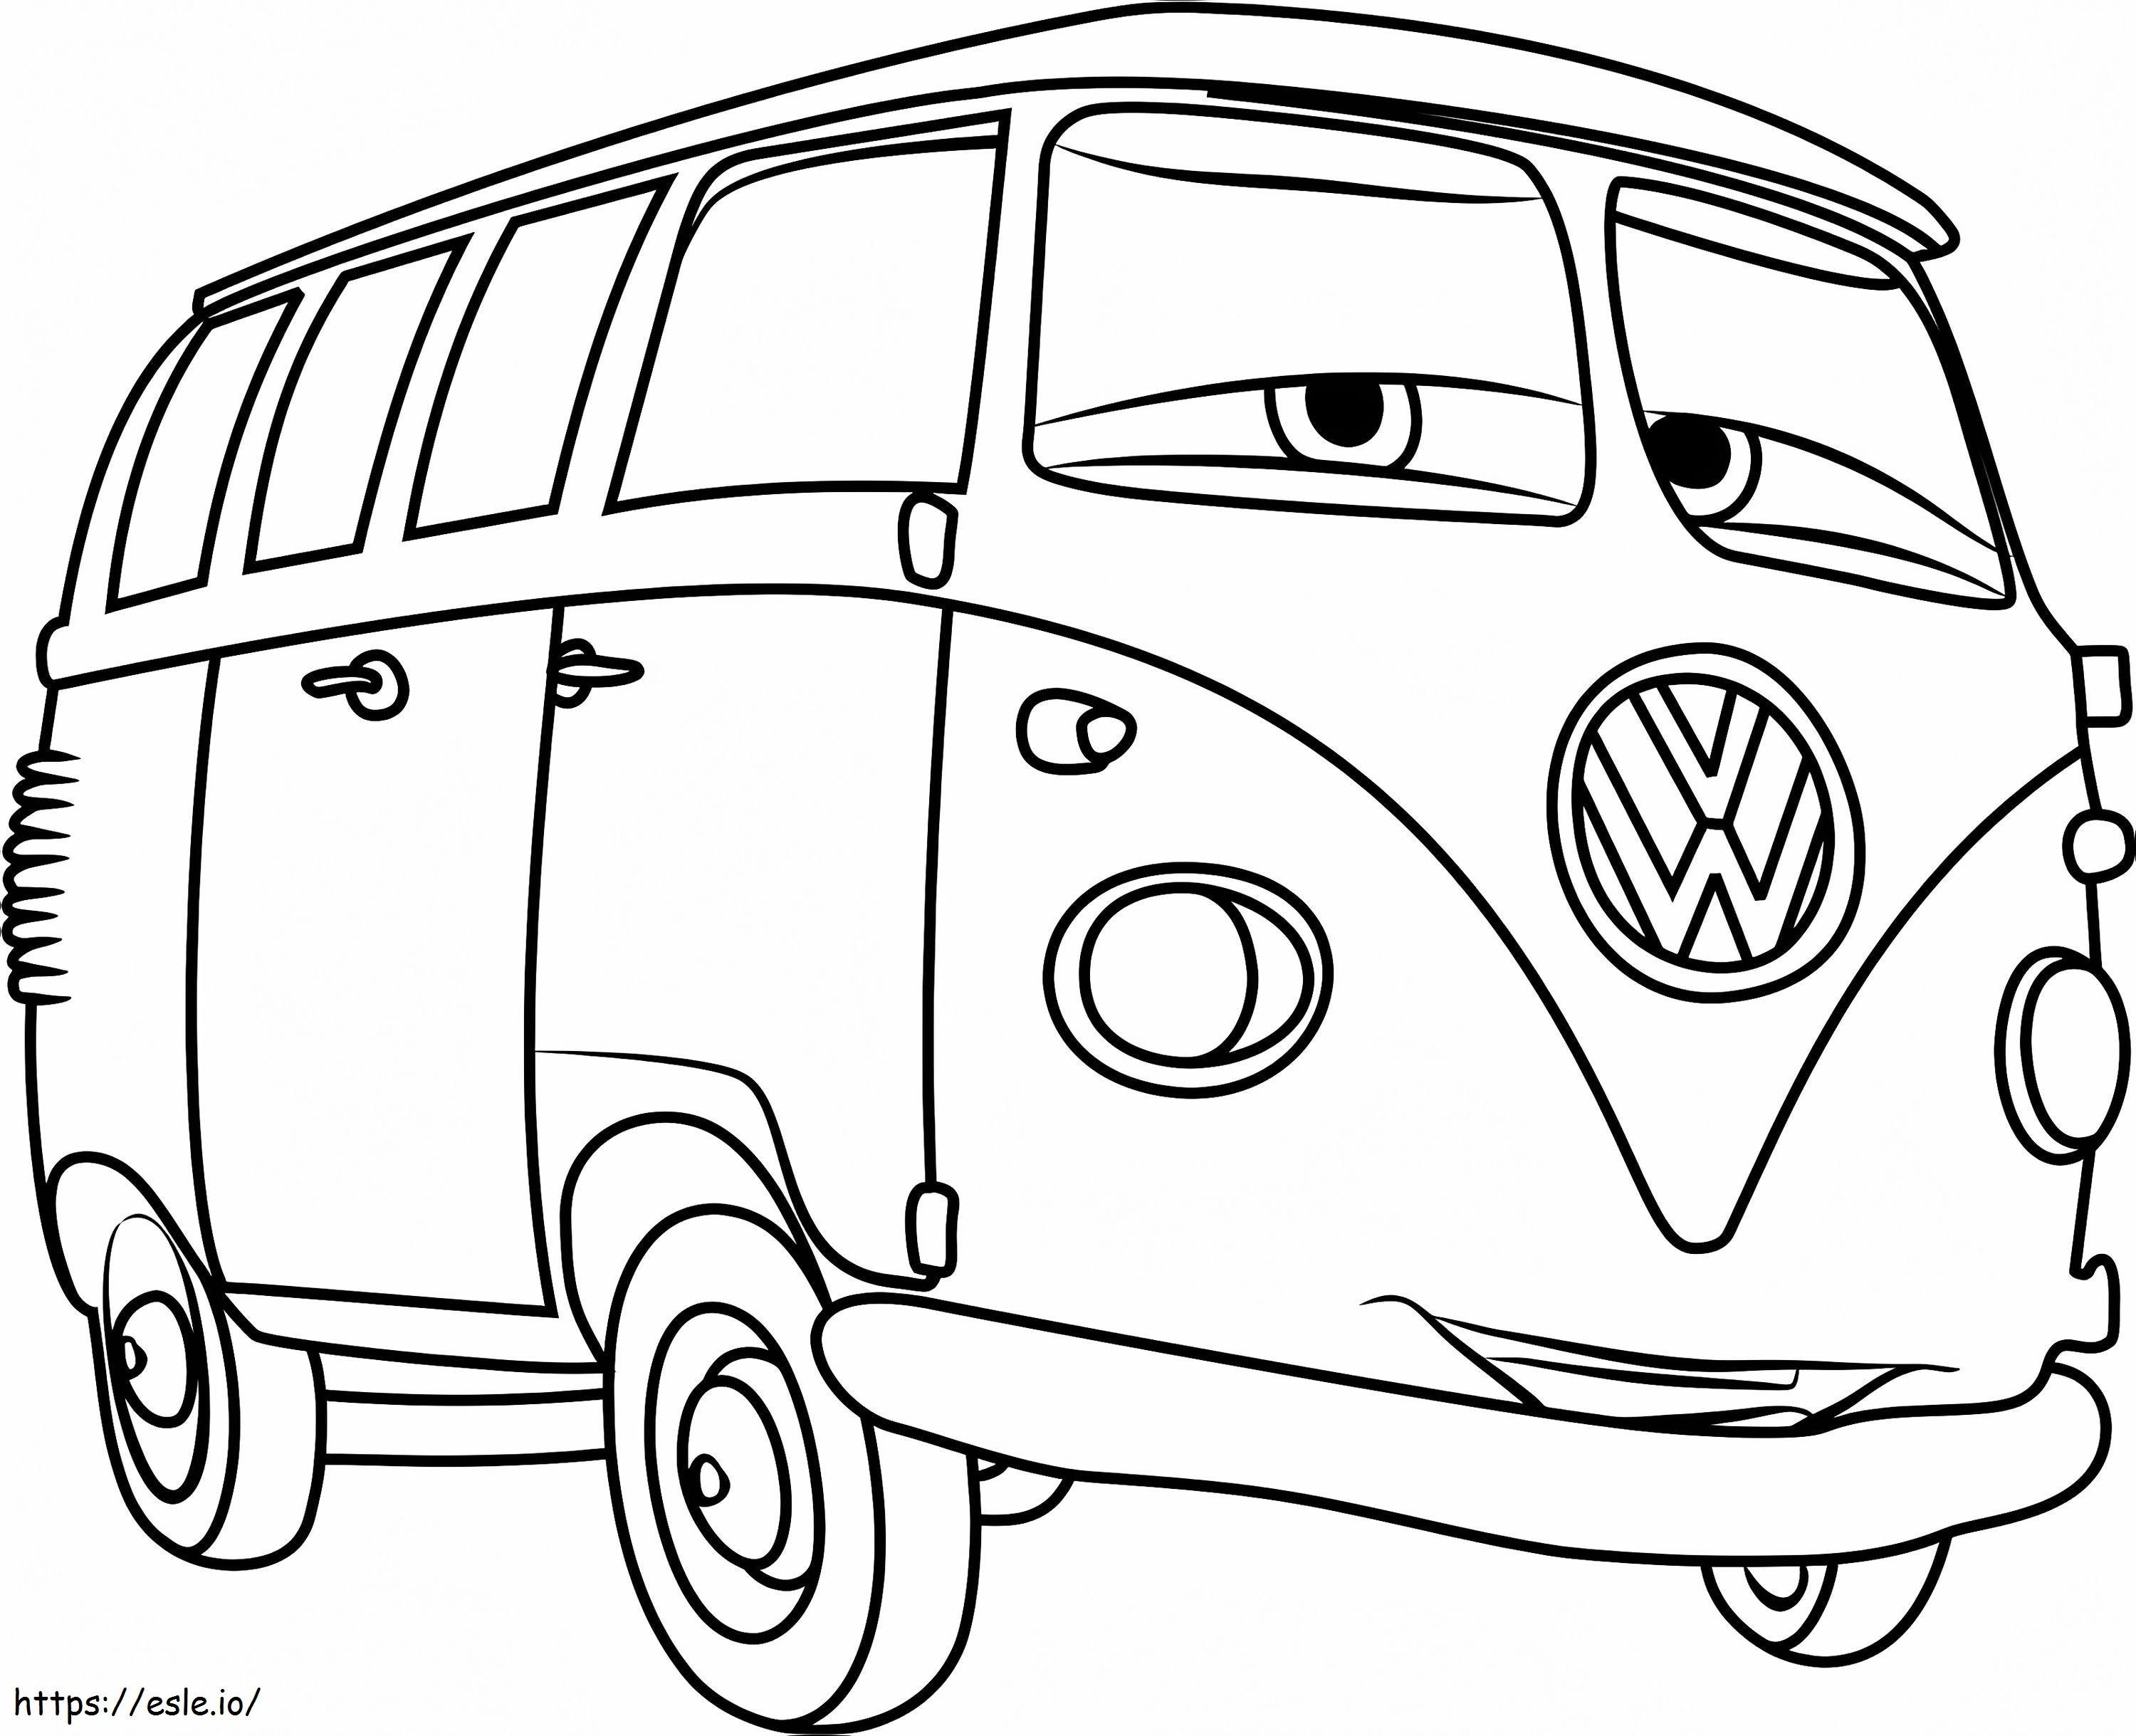 1530239068 Fillmore From Cars 31 coloring page